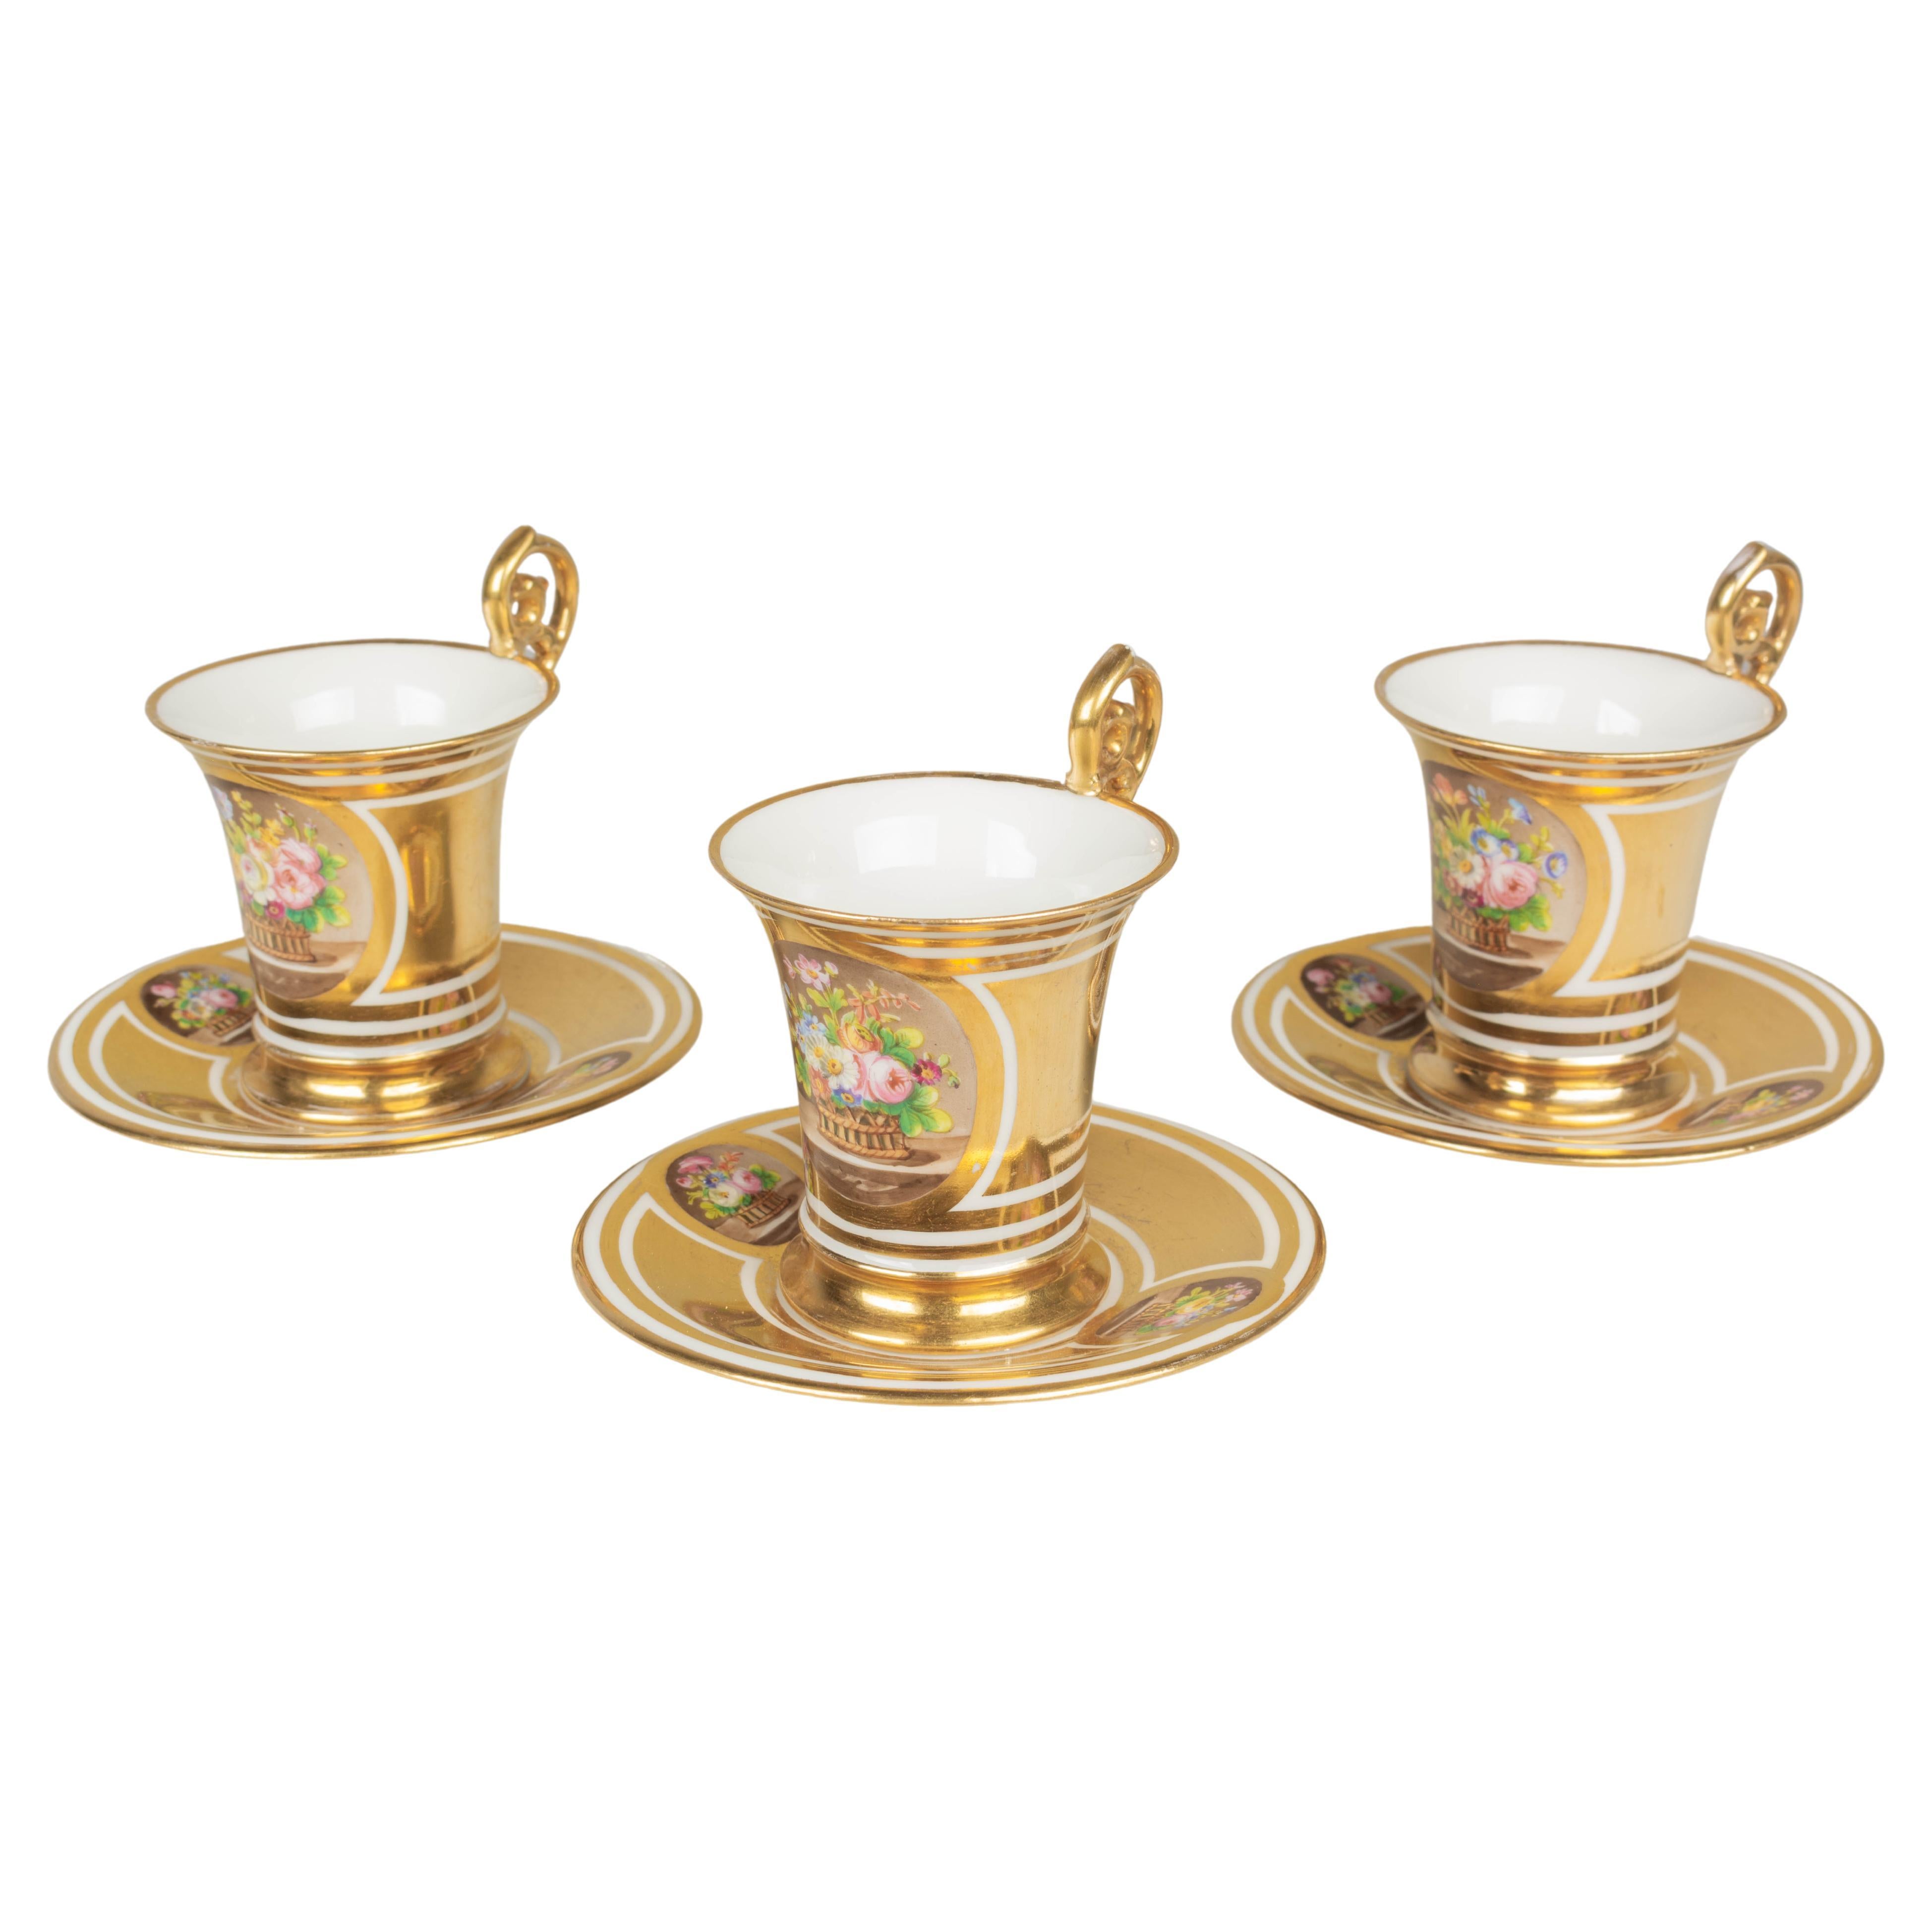 19th Century French Sèvres Gilt Porcelain Cup & Saucer, Set of 3 For Sale